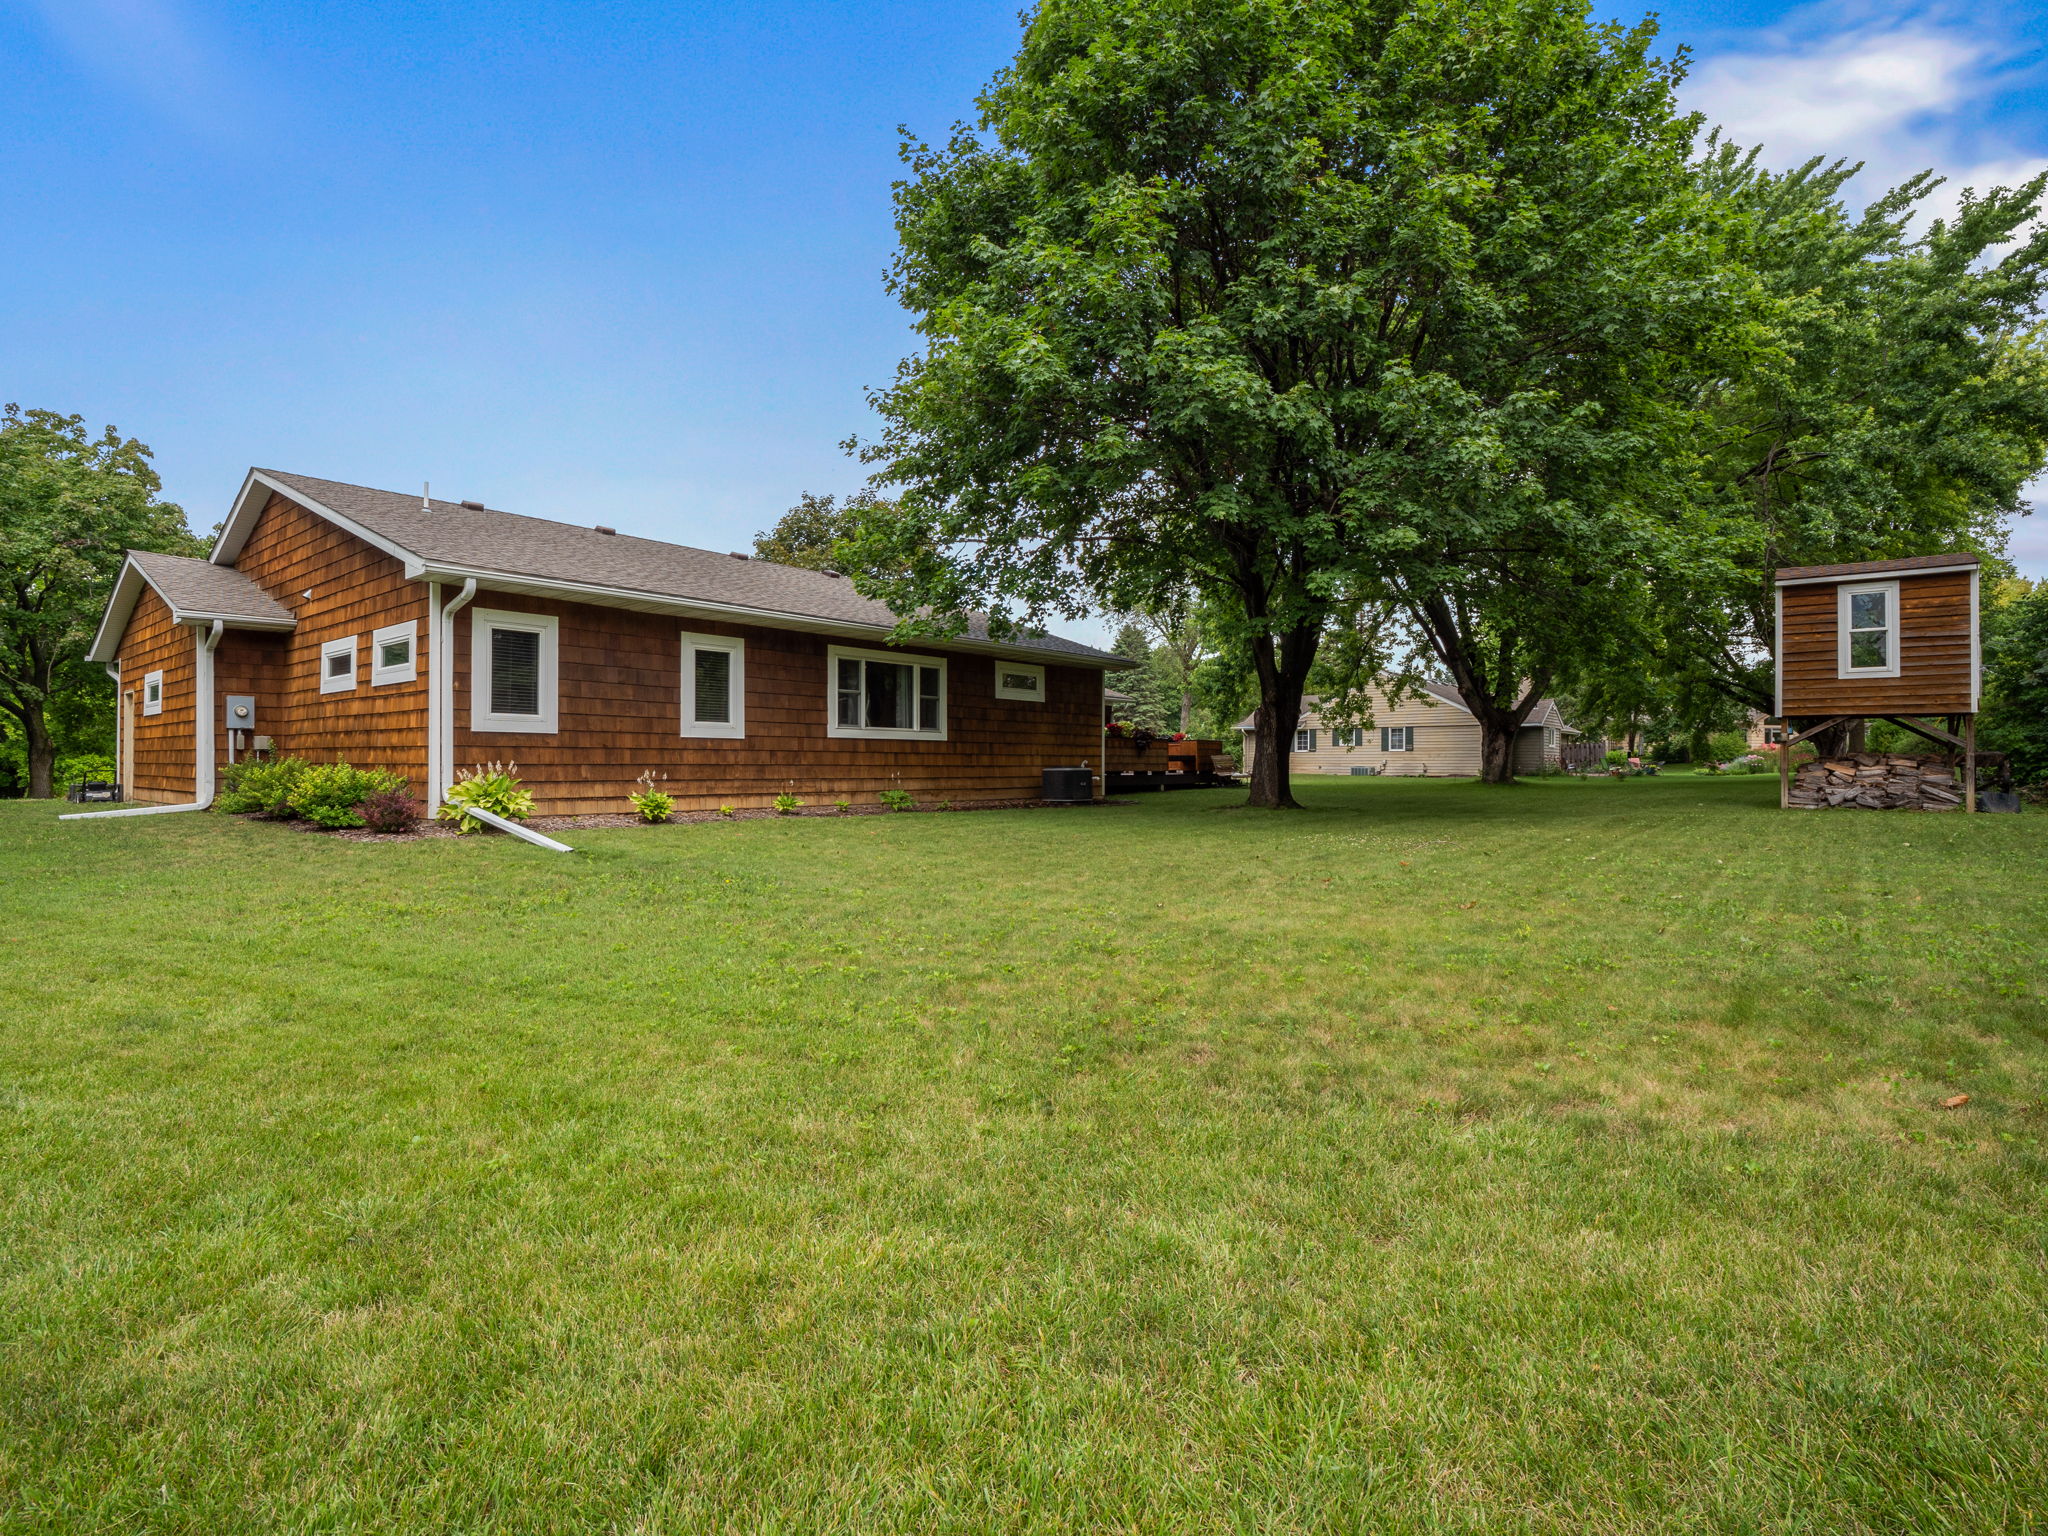  2750 Oliver Lane North, Plymouth, MN 55447, US Photo 40